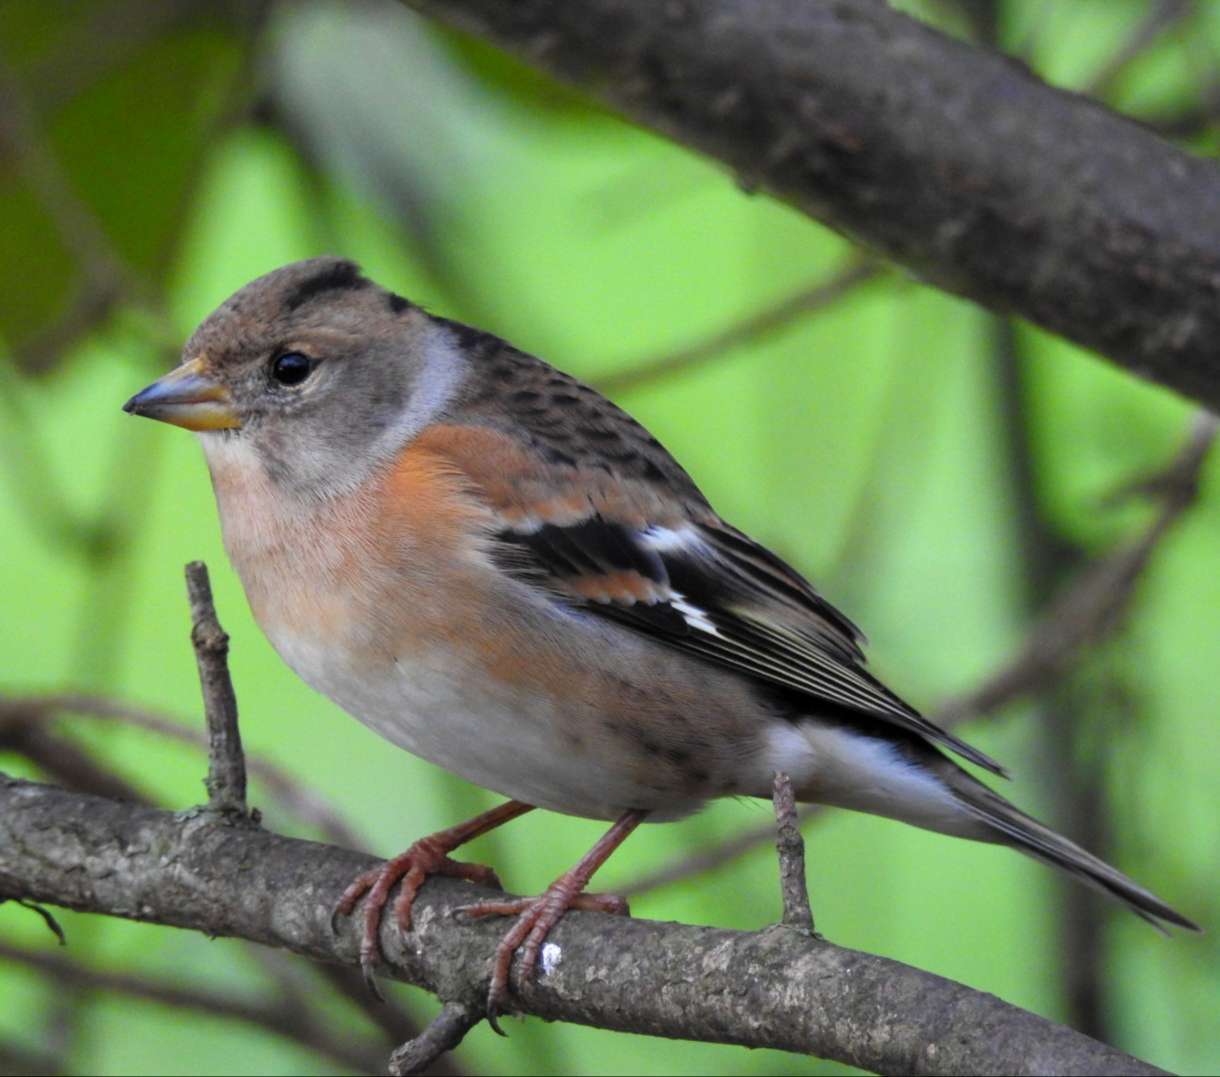 Brambling by Emma Whitton at Clyst St Lawrence